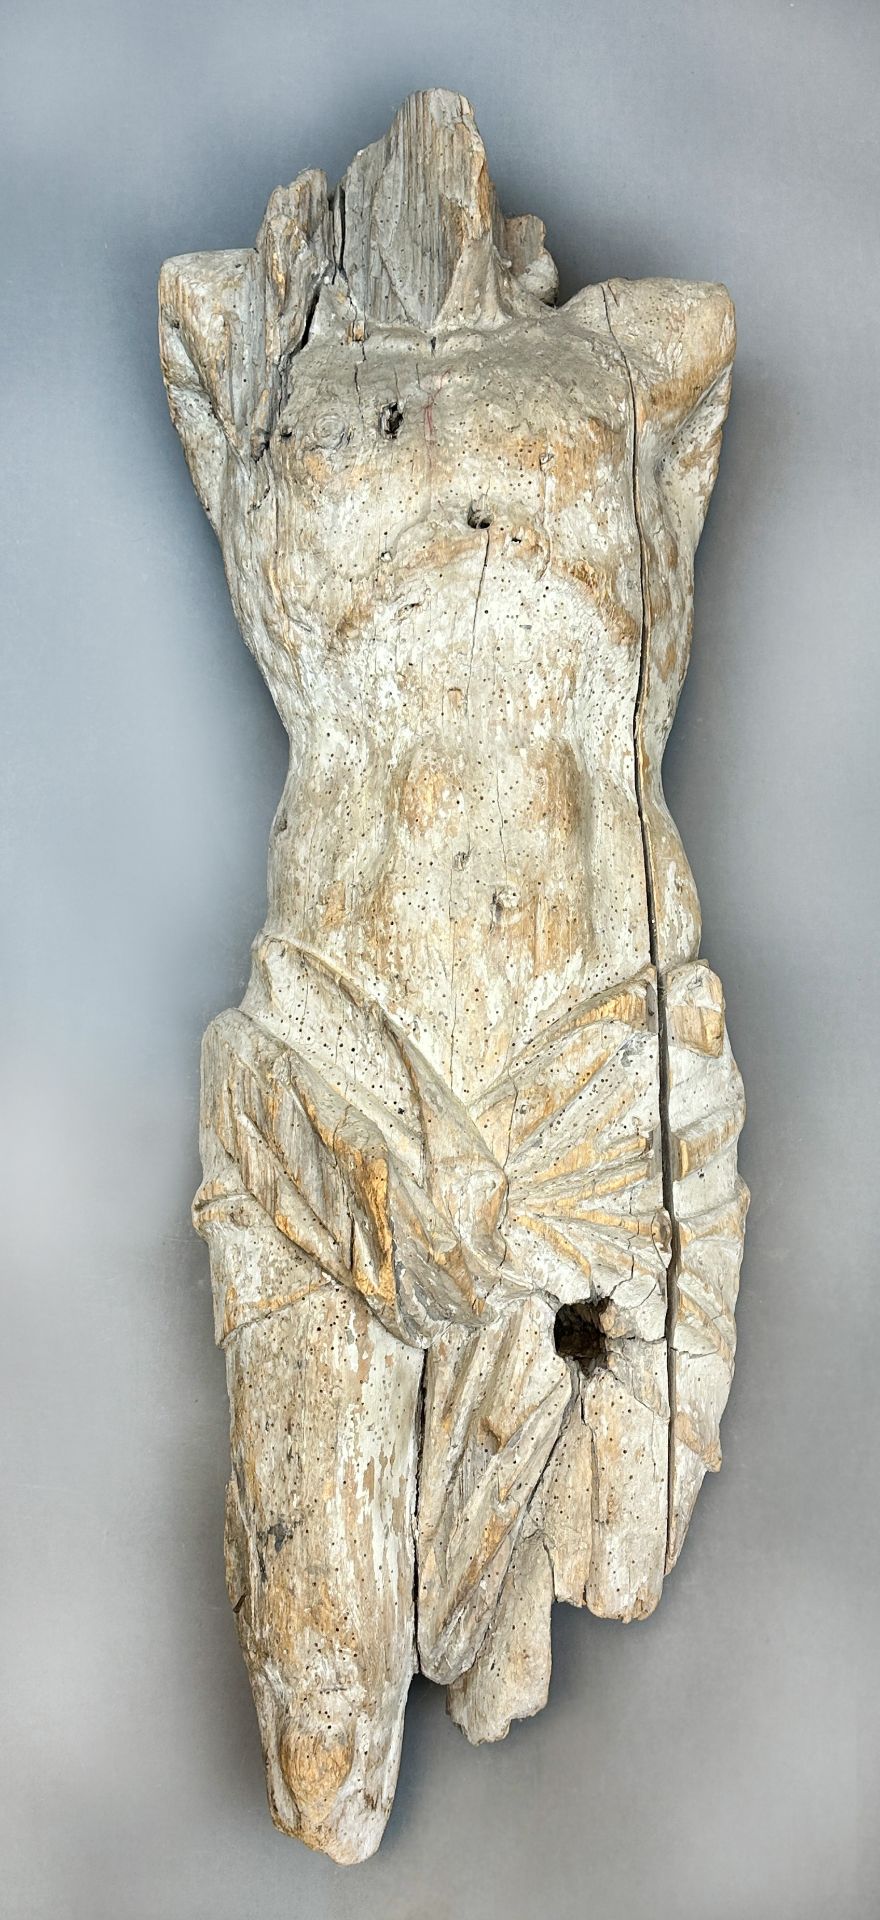 Torso of the crucified Jesus Christ. Wood. Gothic.